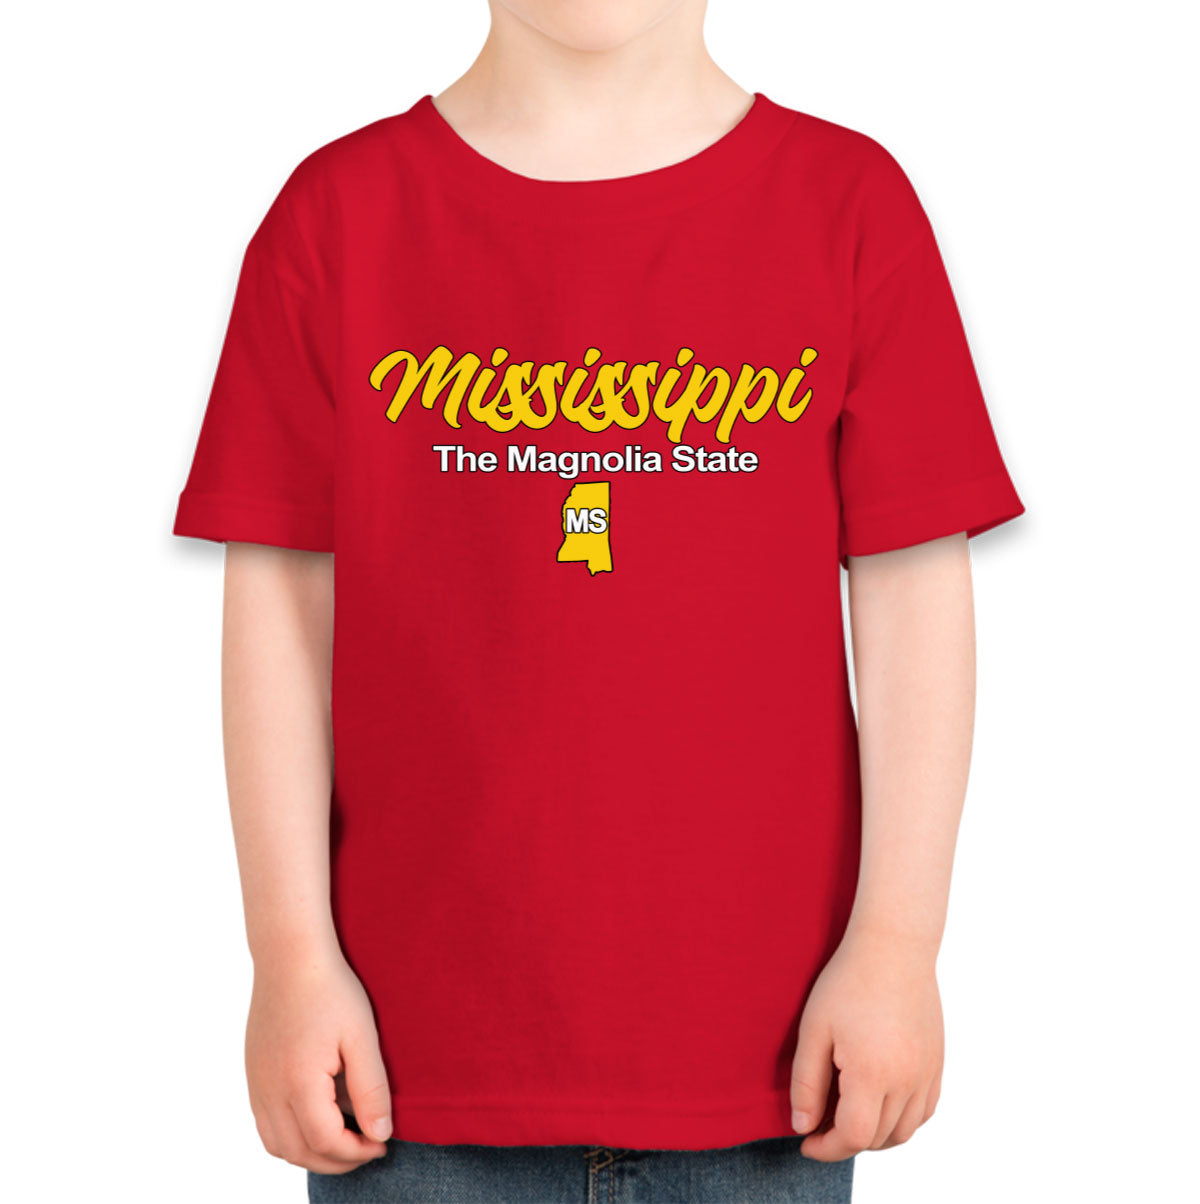 Mississippi The Magnolia State Toddler T-shirt